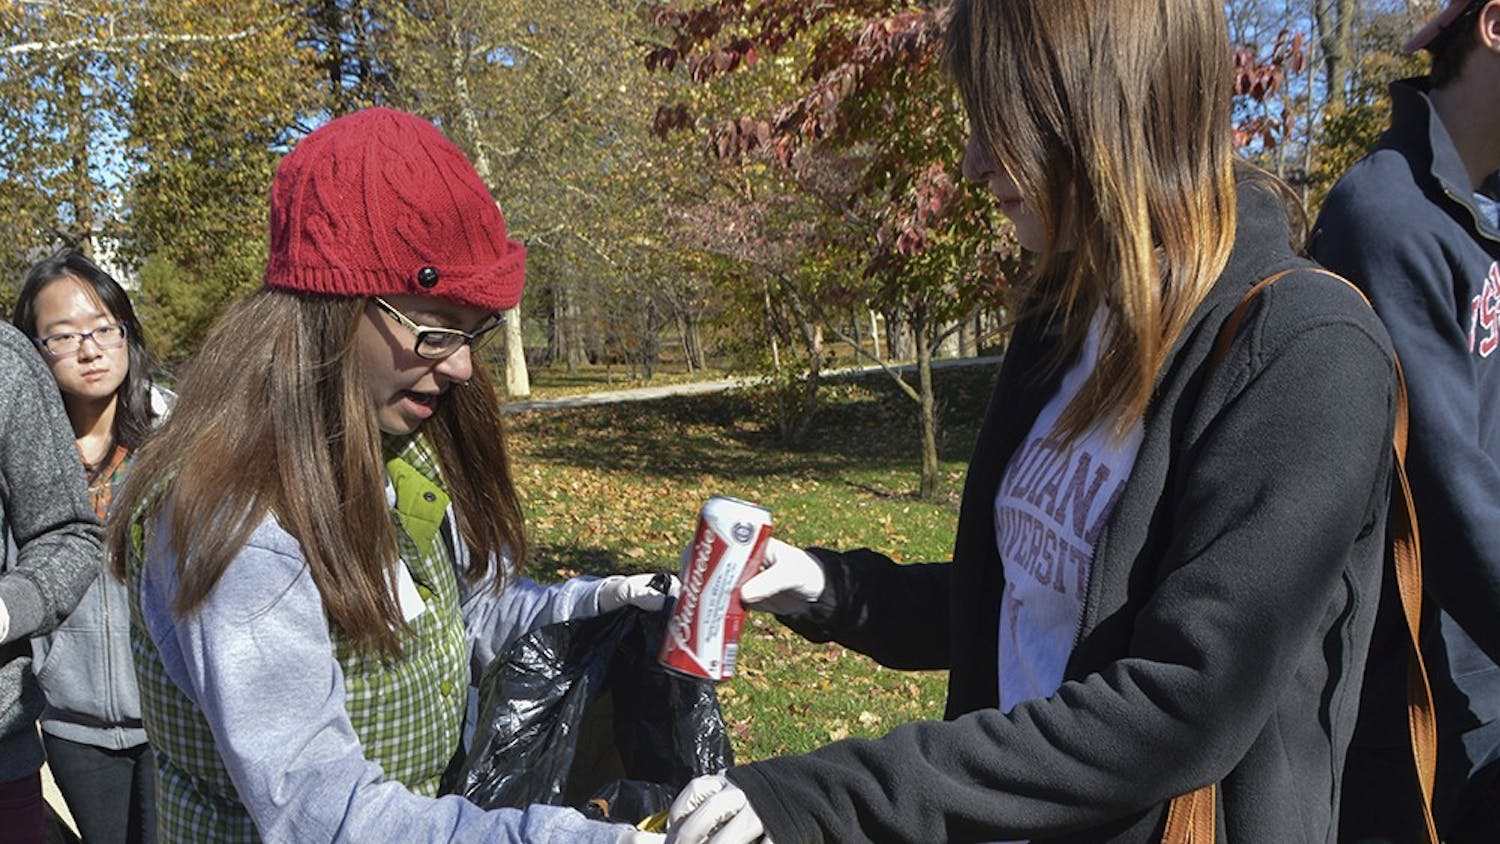 Junior Shelby Fletcher holds the trash bag for Sophomore Lauren Daas as they clean up Sunday near Franklin Hall as part of the Civic Leadership Development Campus Cleanup.